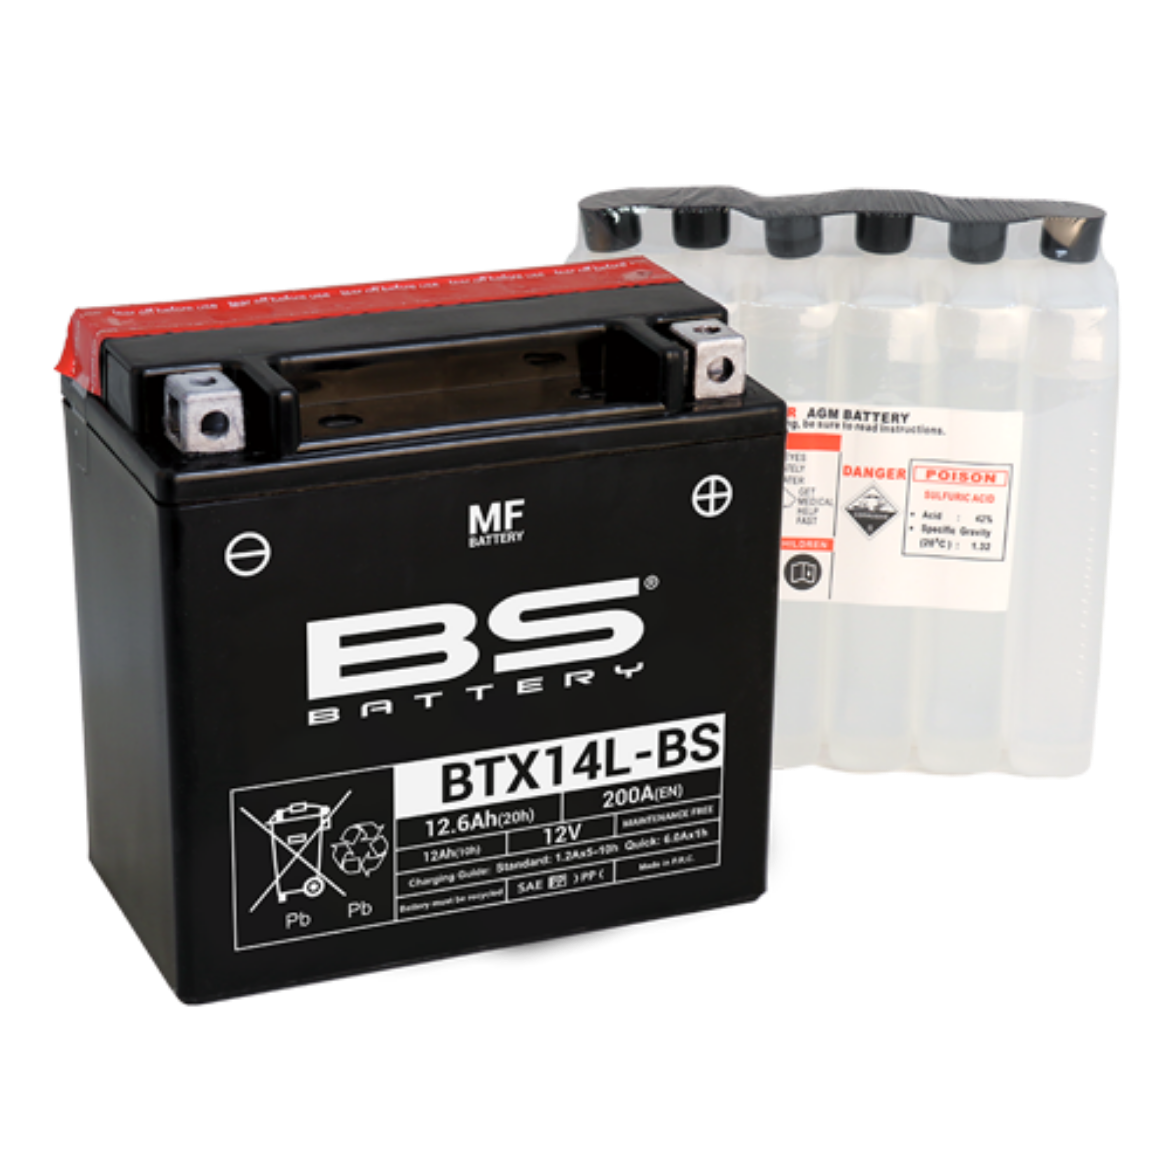 Picture of BTX14L-BS 12V 200CCA 12AH MAINTENANCE FREE BS MOTORCYCLE BATTERY